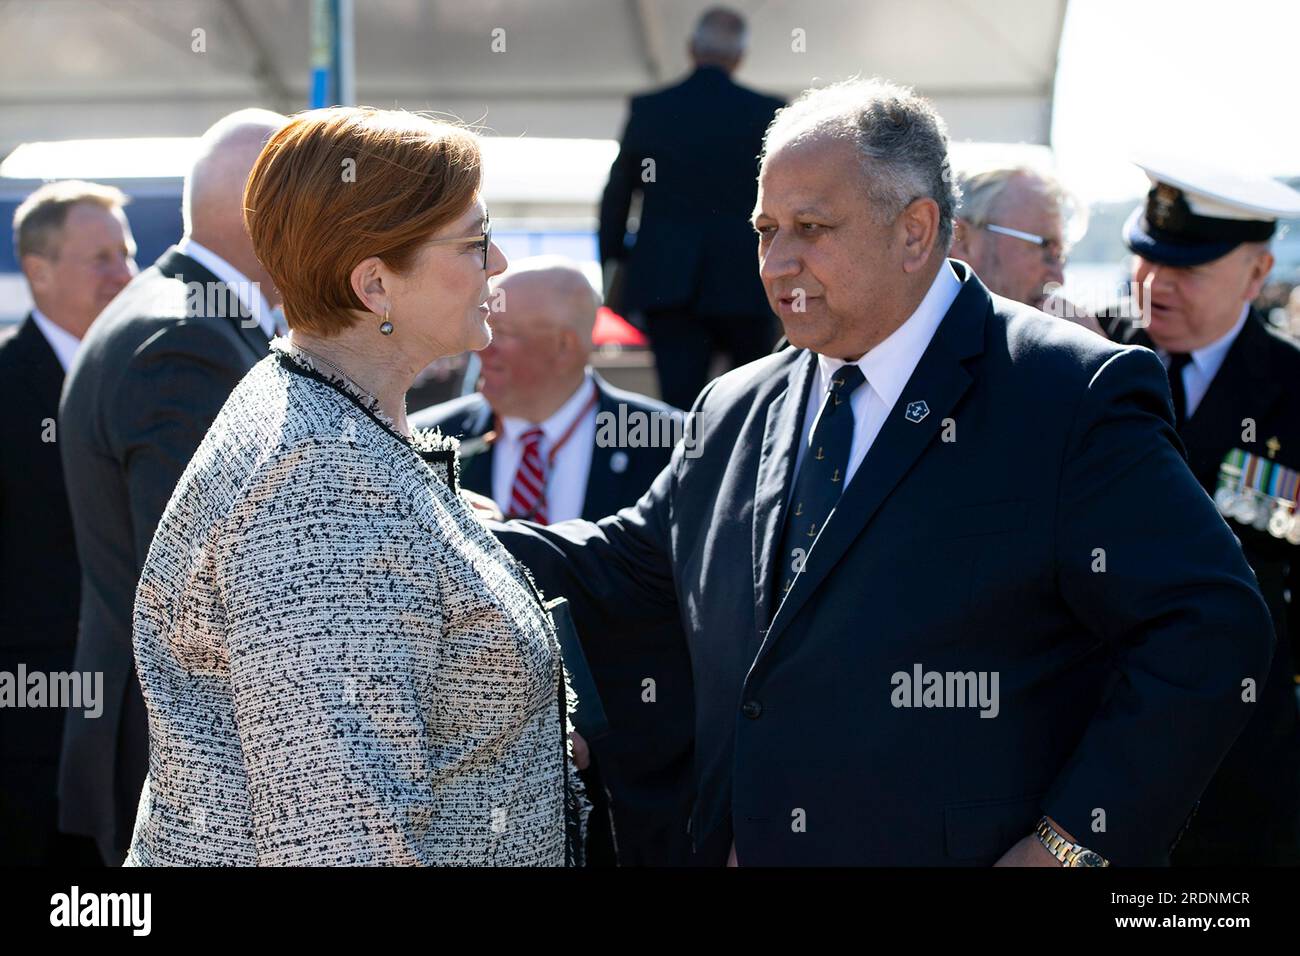 Sydney, Australia. 22nd July, 2023. U.S Secretary of the Navy Carlos Del Toro, right, speaks with Australian Senator Marise Payne at the conclusion of the commissioning ceremony for the Independence-variant littoral combat ship USS Canberra, July 22, 2023 in Sydney, Australia. Credit: EJ Hersom/U.S Navy Photo/Alamy Live News Stock Photo